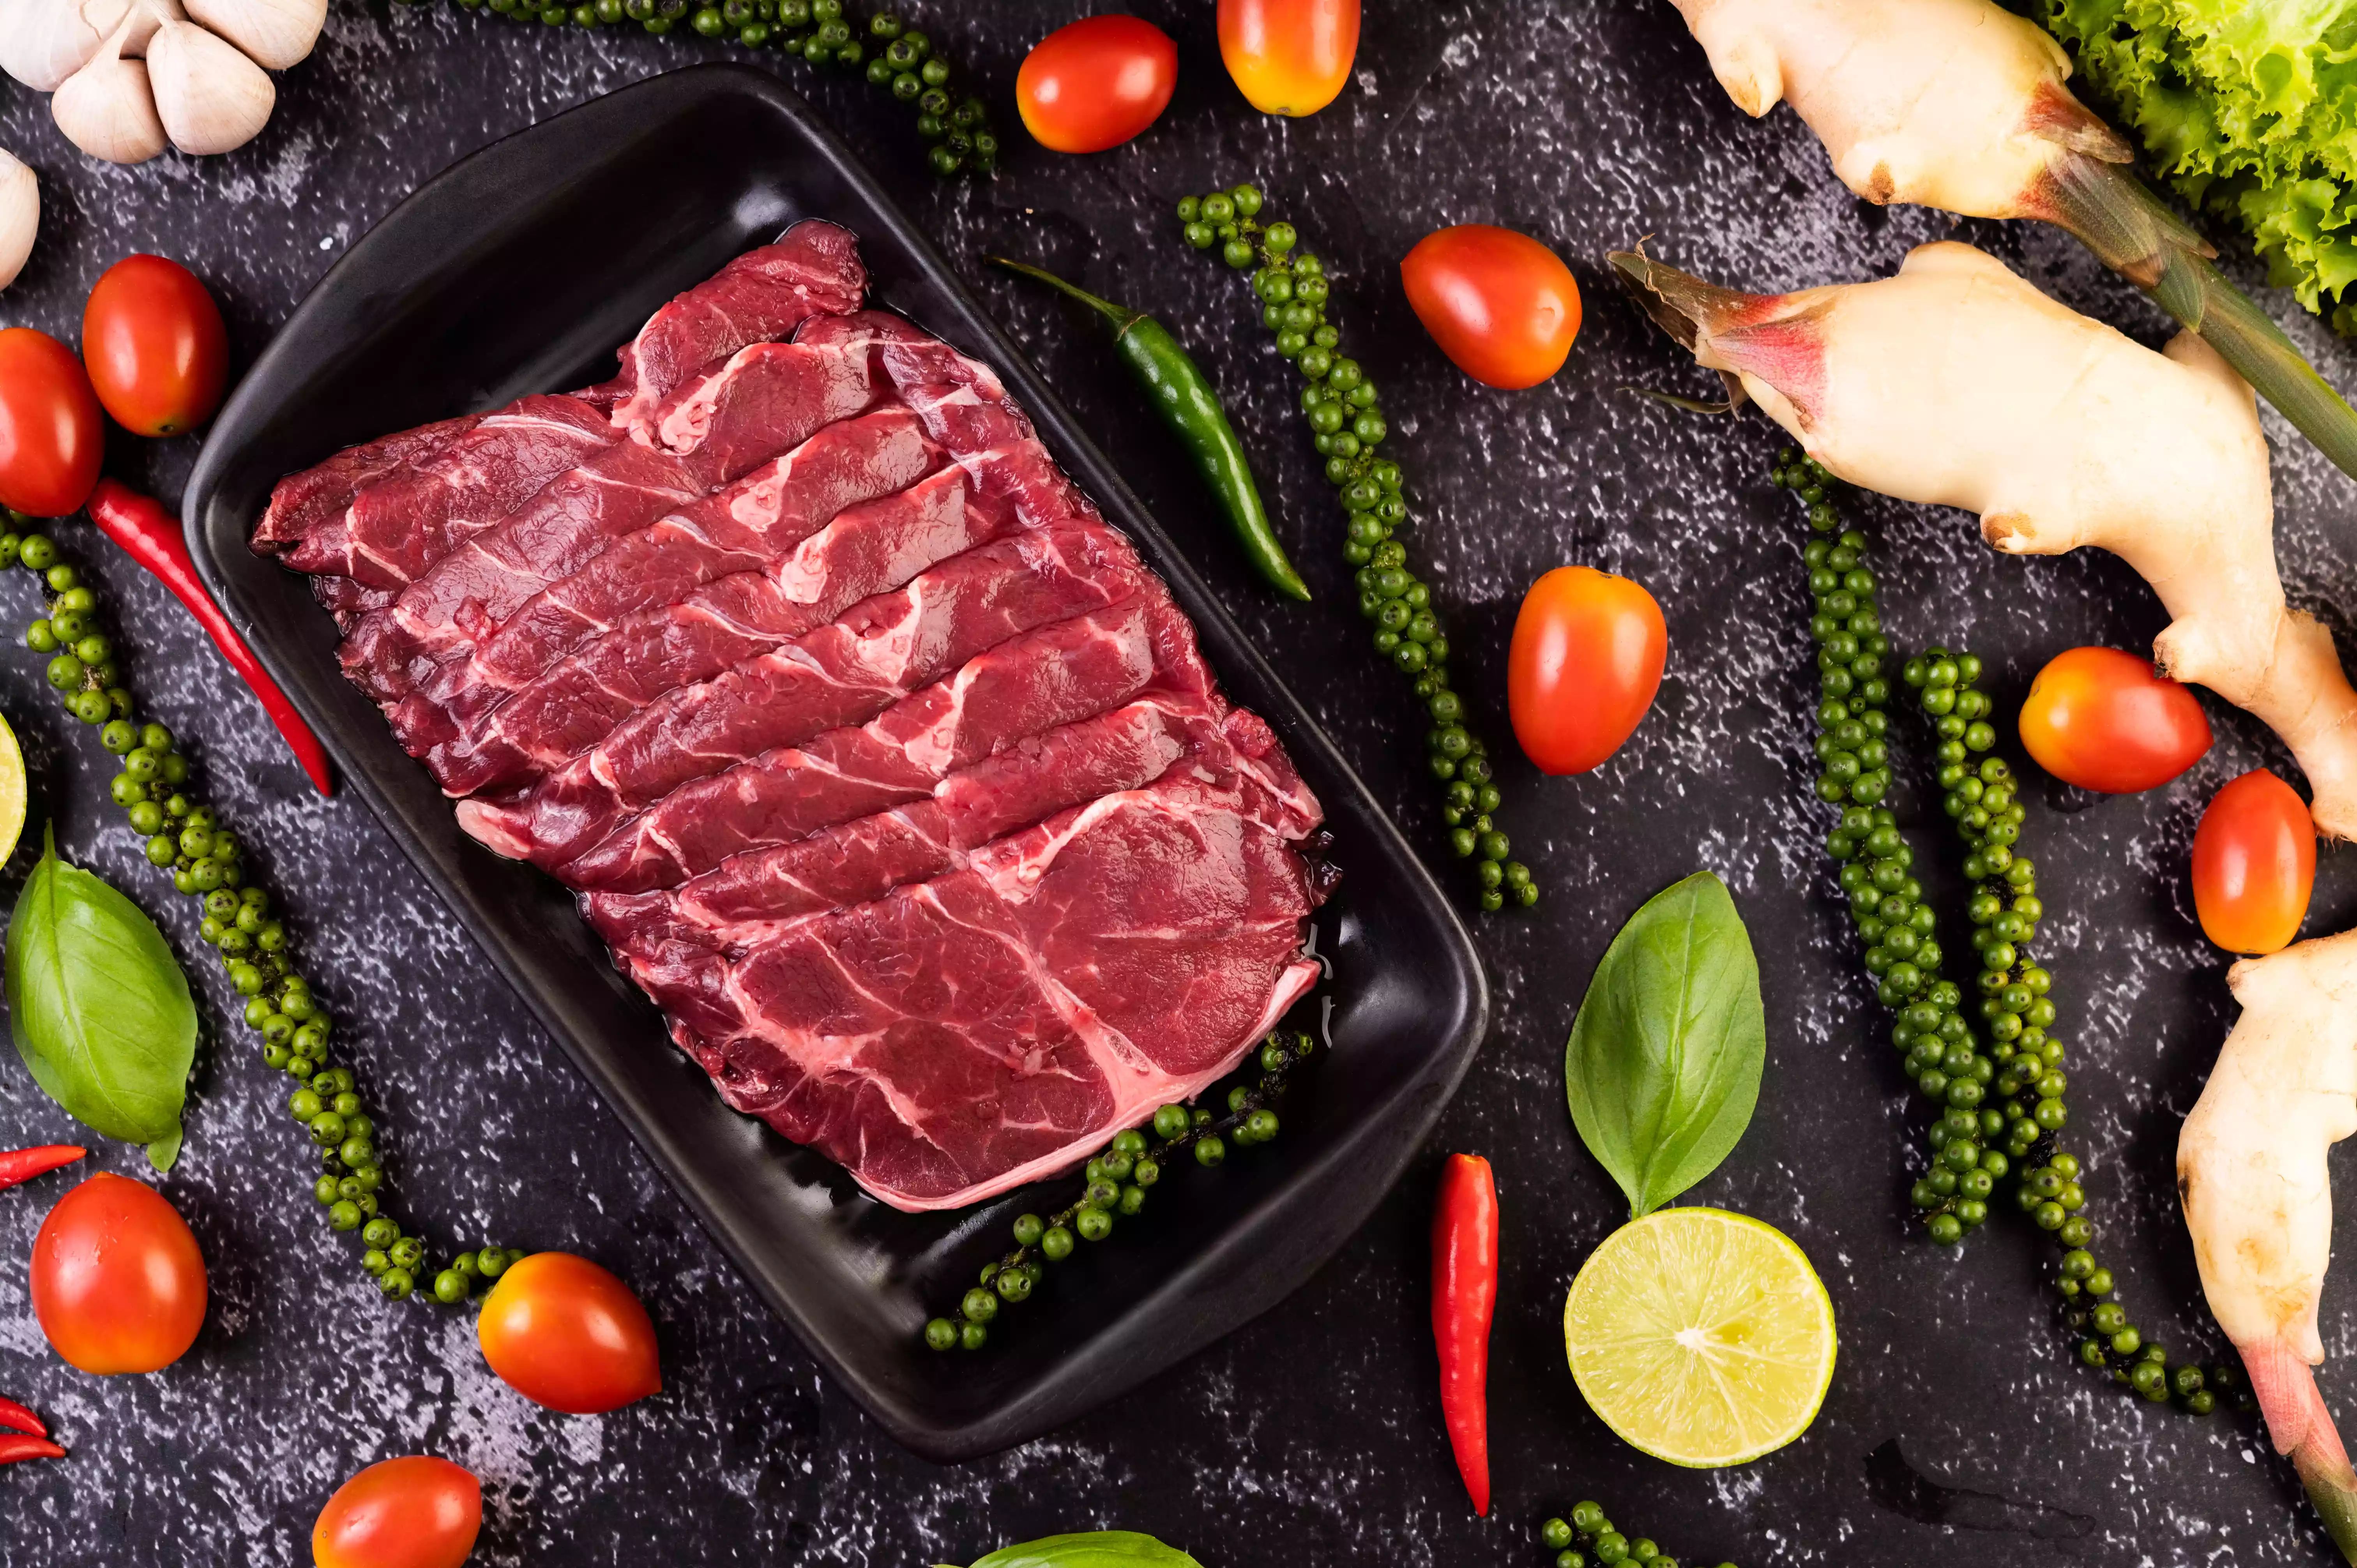 What are the Benefits and Harms of Consuming Red Meat? What are the Effects on the Kidneys?